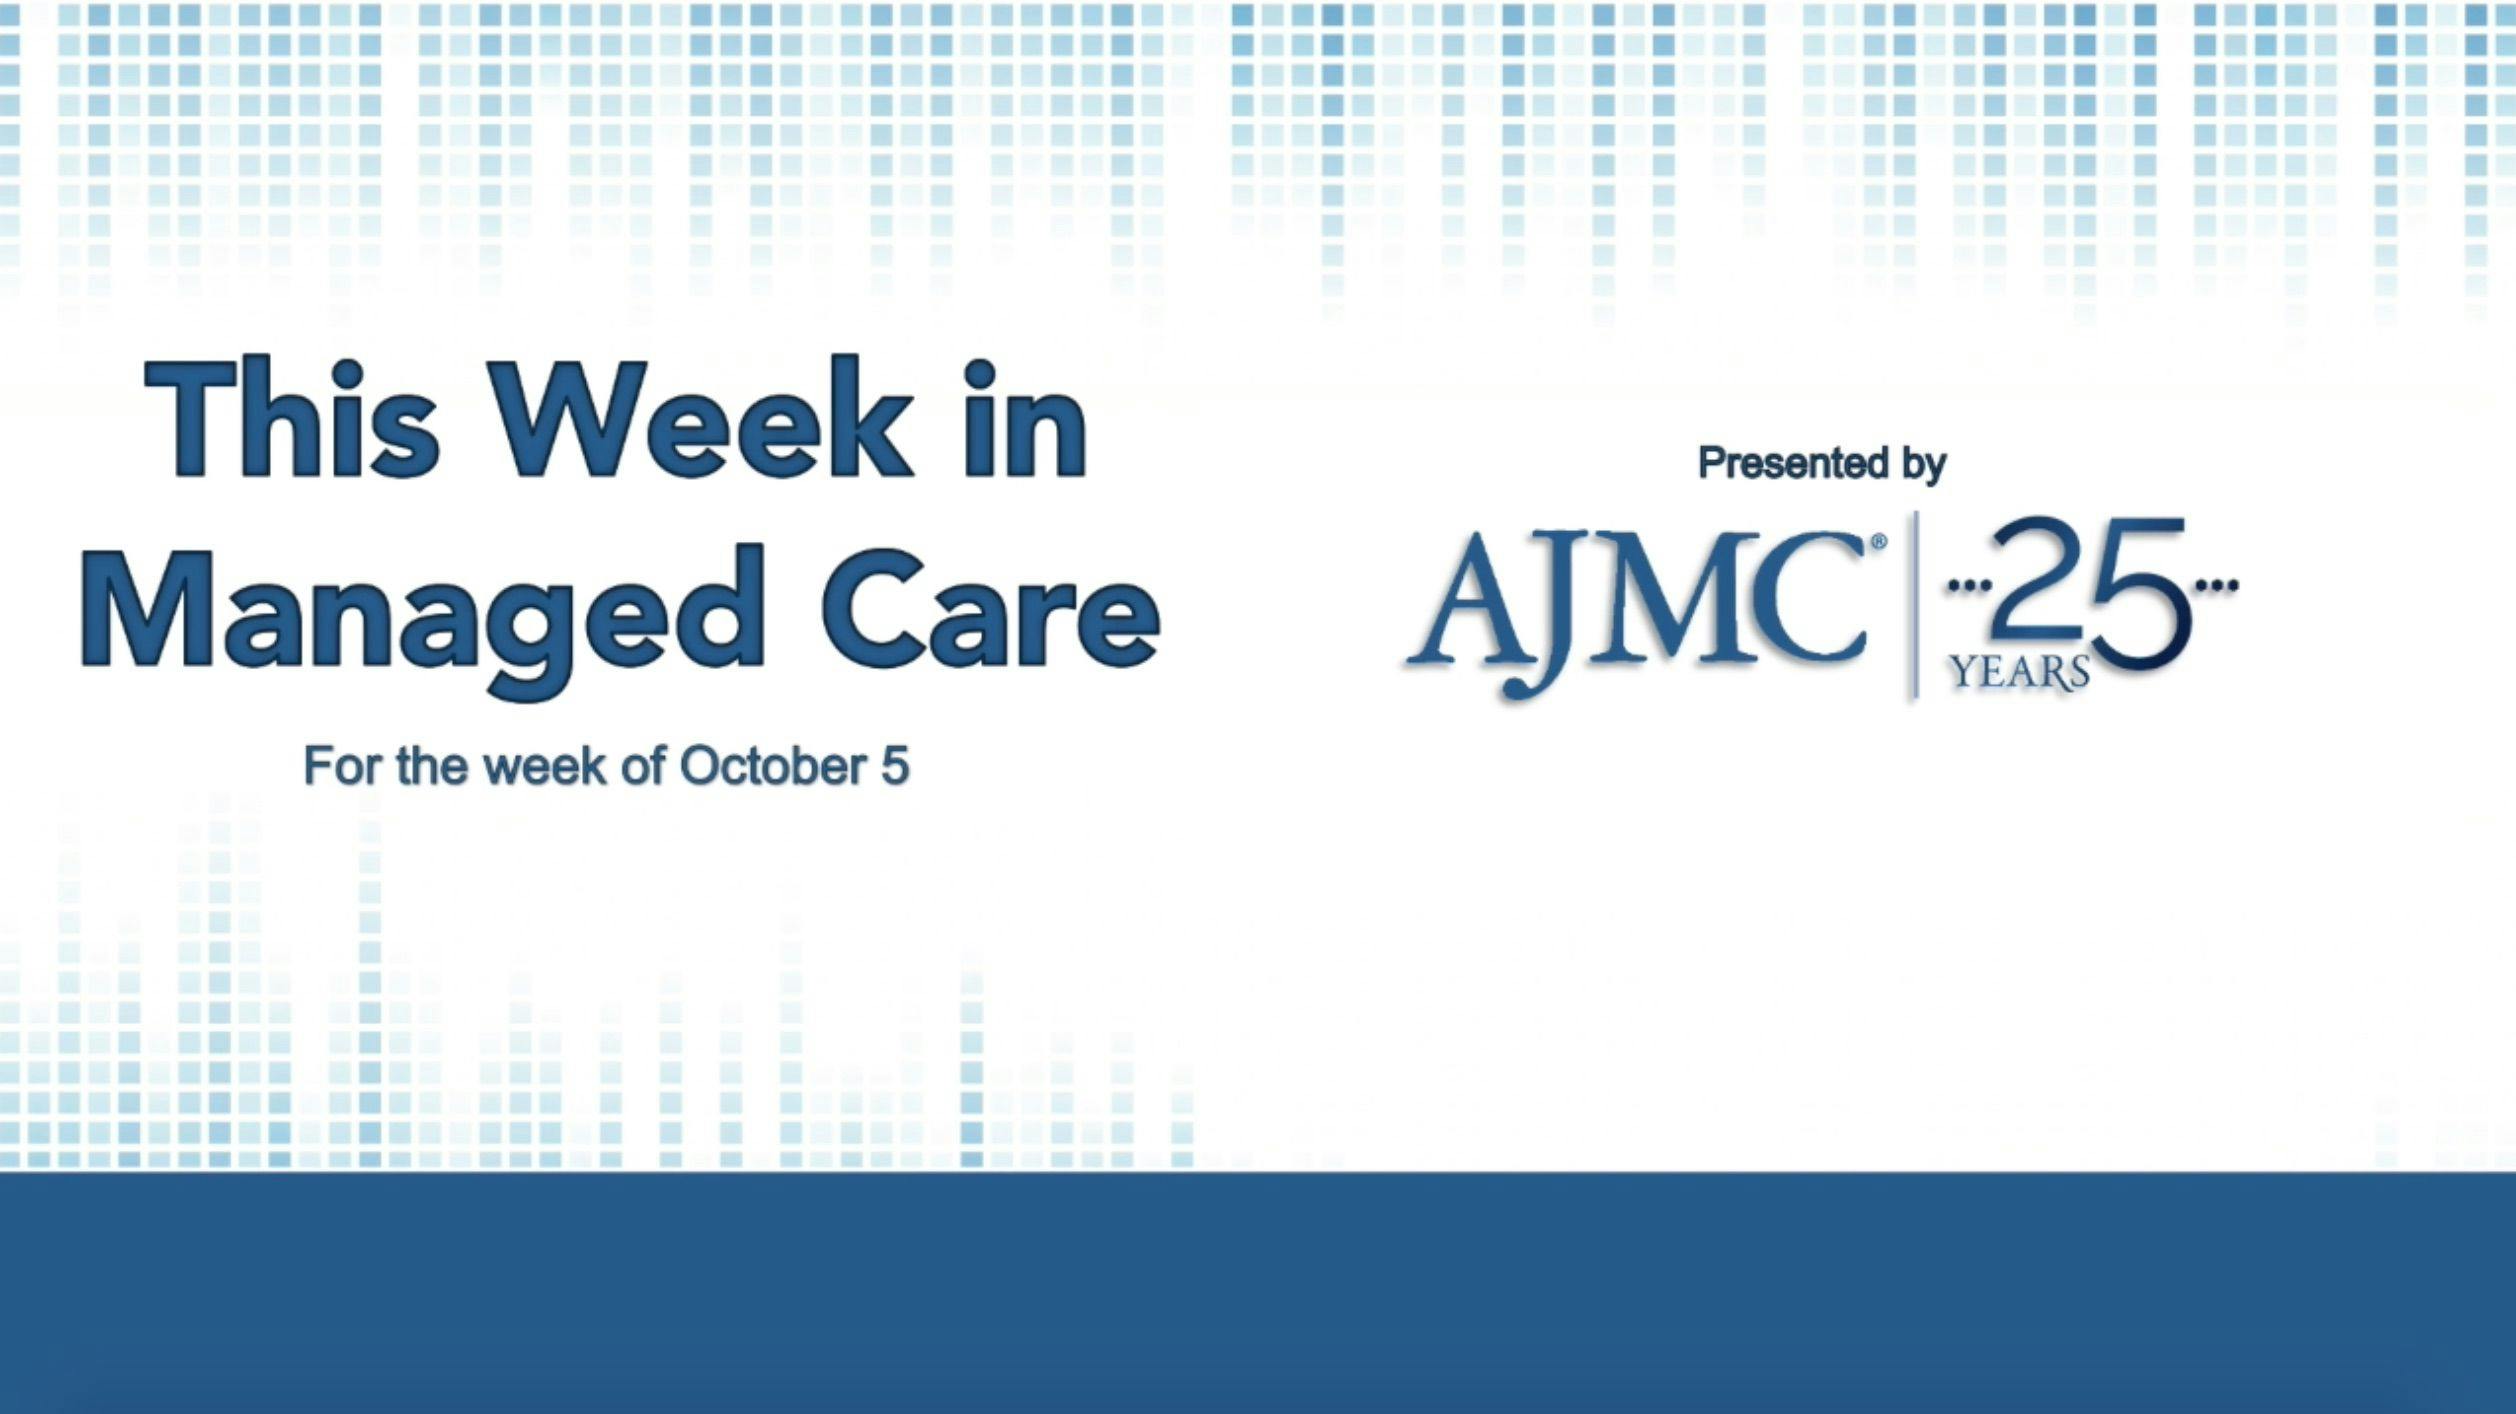 This Week in Managed Care for the week of October 5